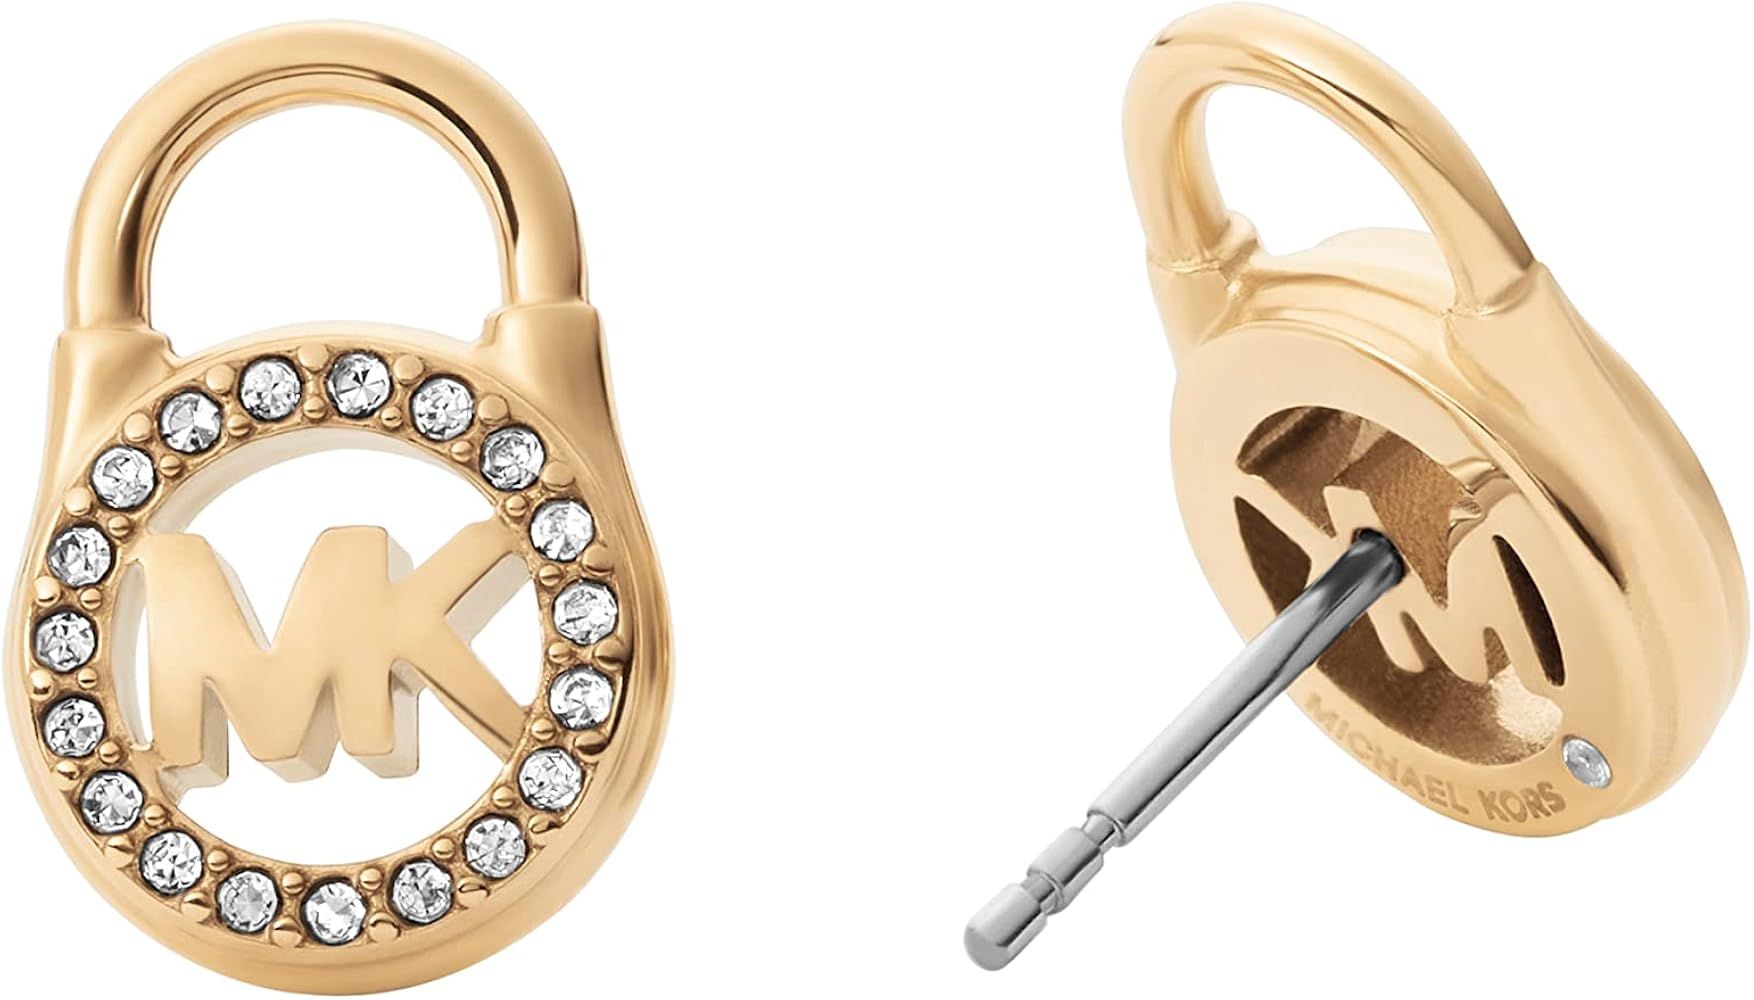 Michael Kors Women's Stainless Steel Stud Earrings With Crystal Accents | Amazon (US)